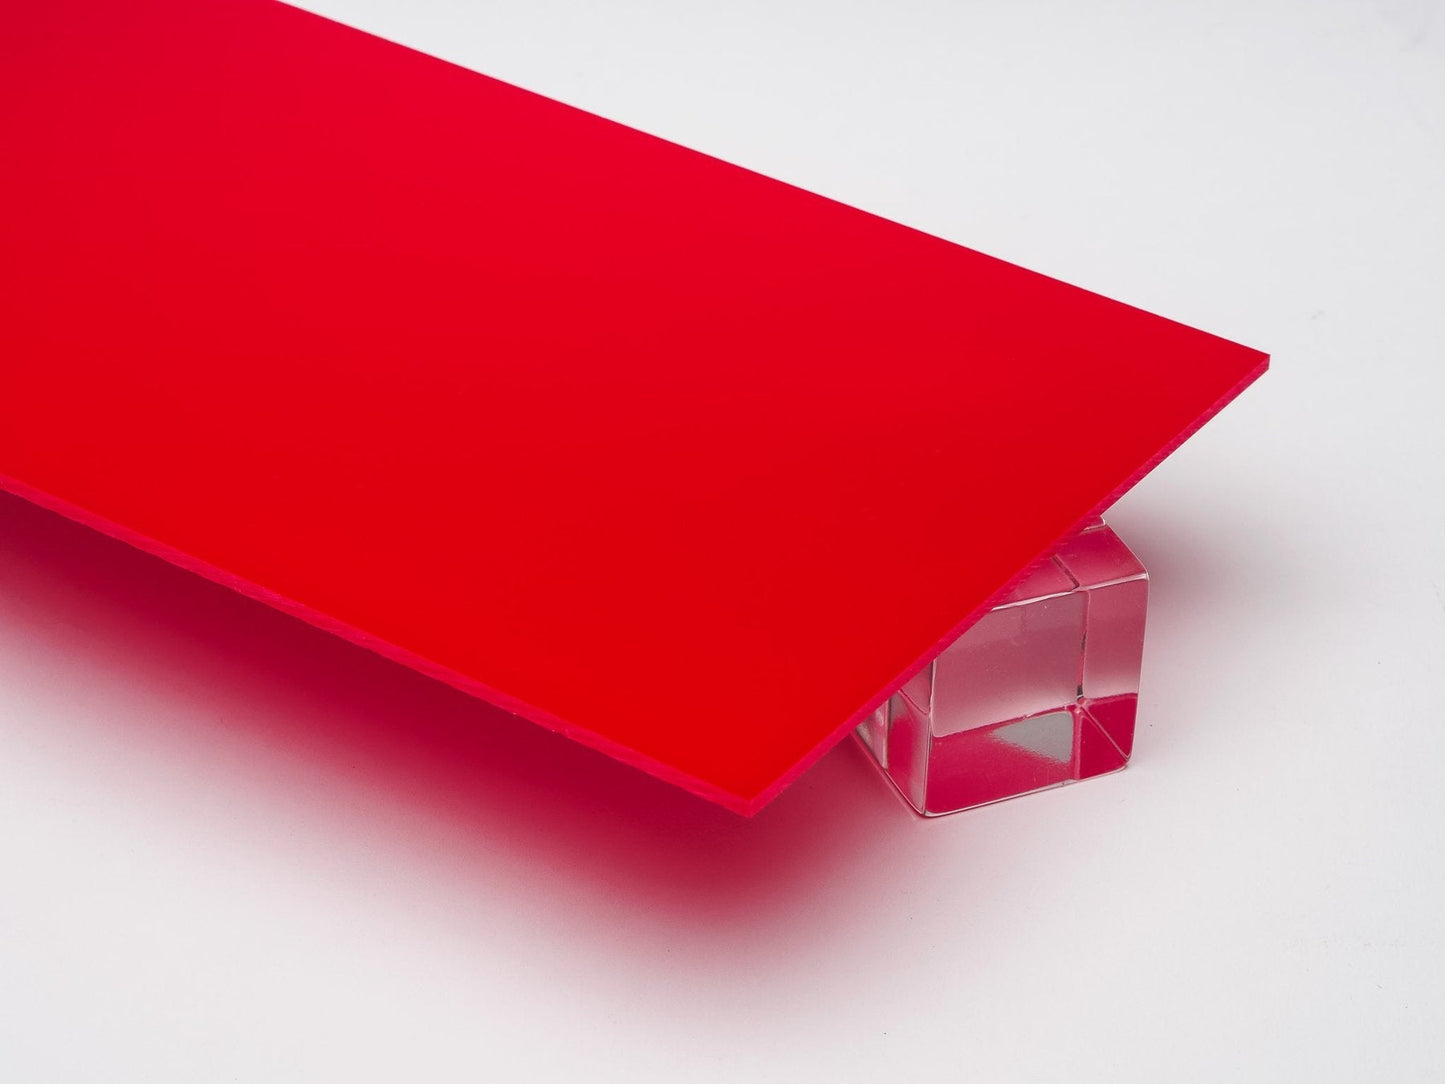 Cast Acrylic Sheet - Opaque Colors - Multiple Colors Available - 0.125" (3mm) Thick